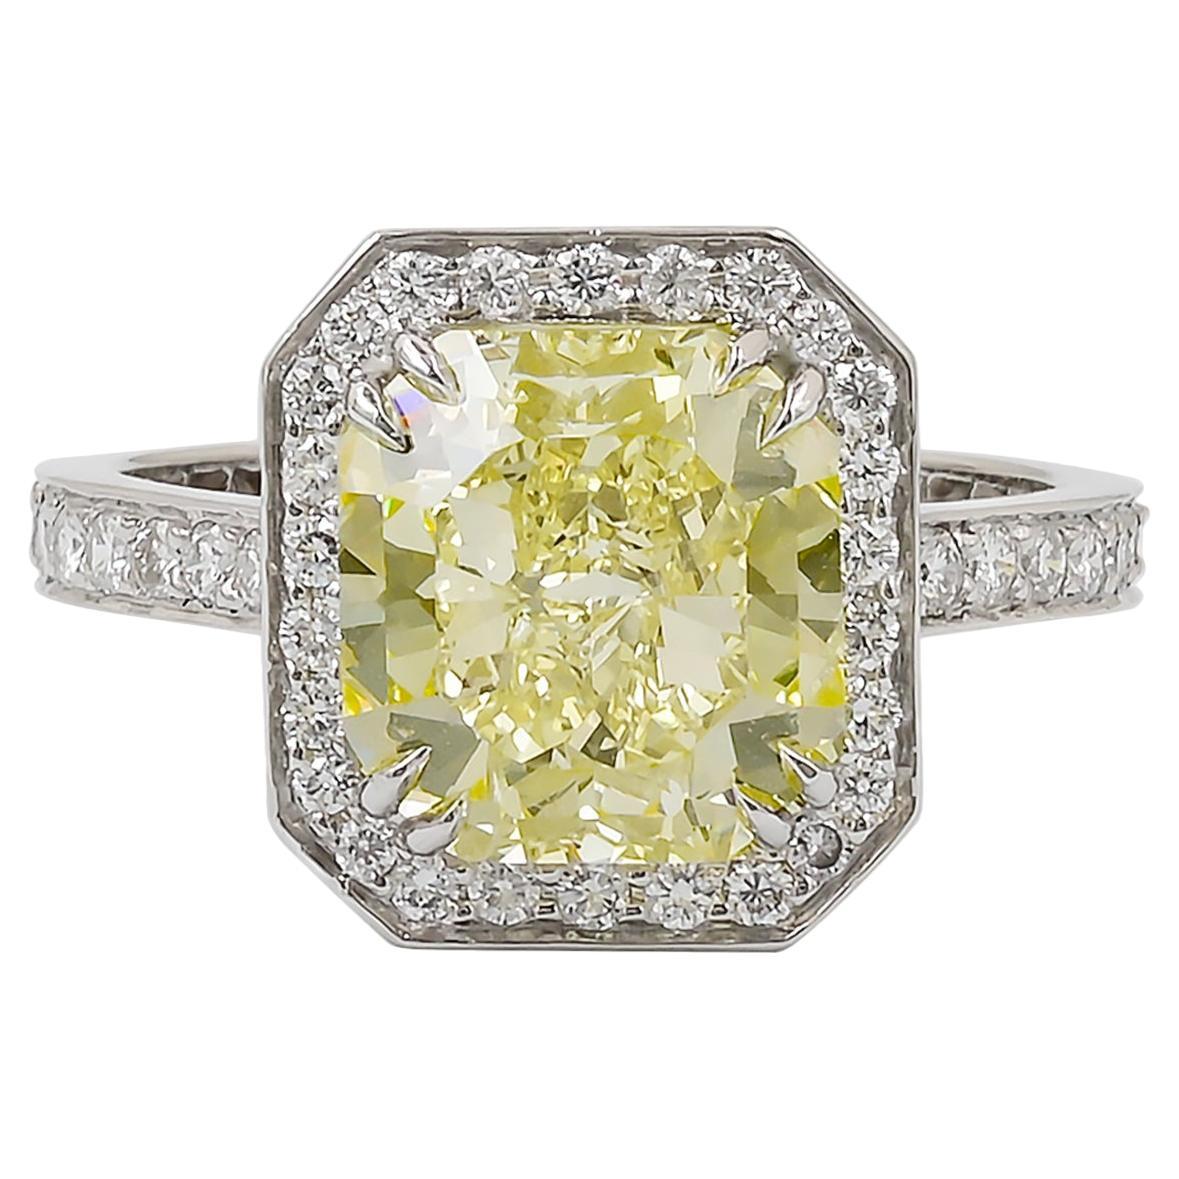 Spectra Fine Jewelry GIA Certified 4.05 Carat Yellow Diamond Engagement Ring For Sale